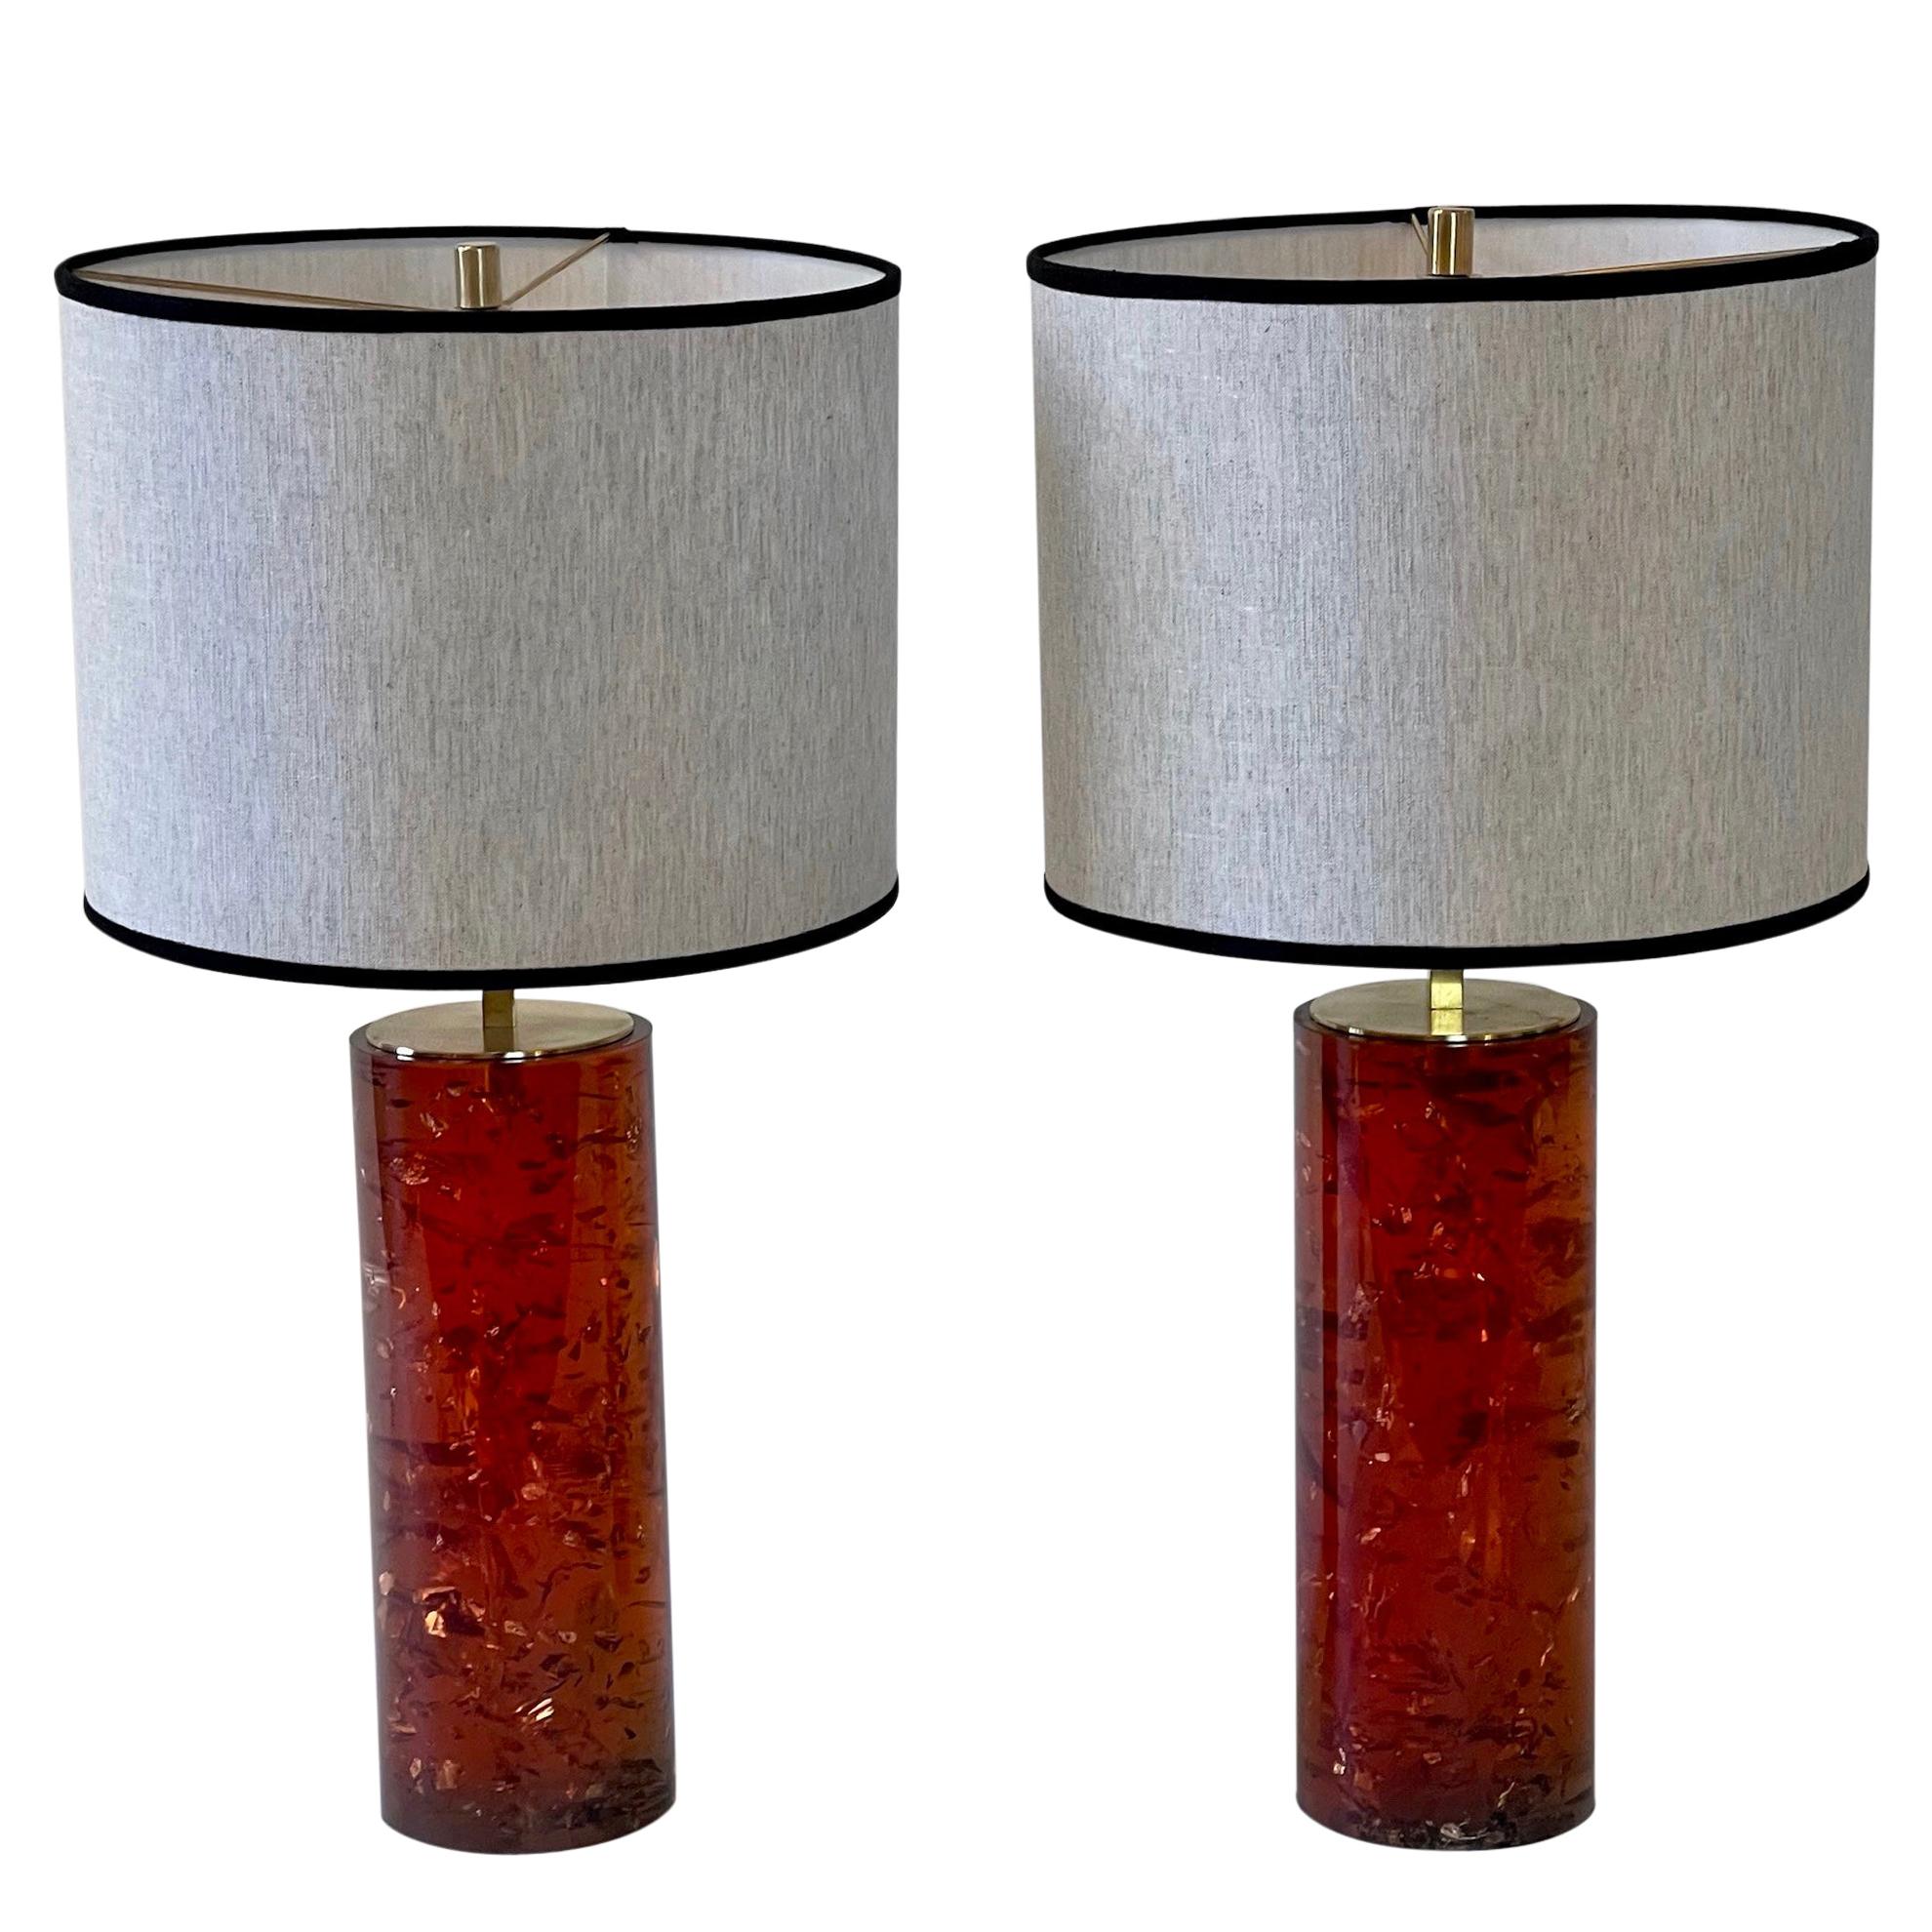 Pair of Italian Reddish Amber Fractal Resin Table Lamps w/Brass Details & Shades